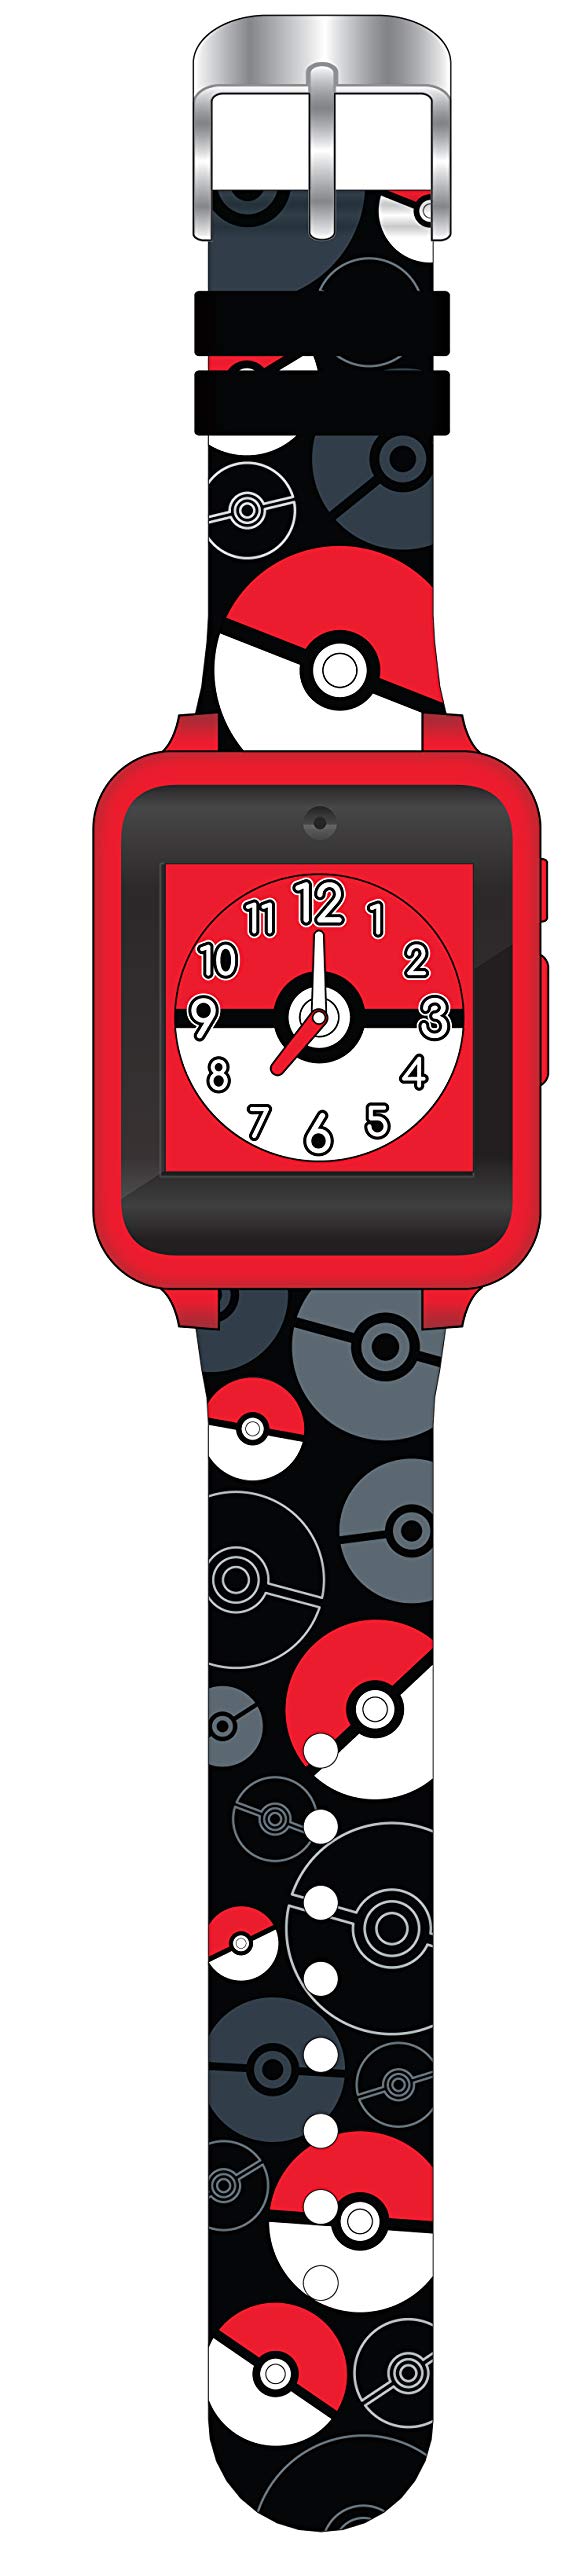 Accutime Kids Pokemon Pokeball Red Educational Touchscreen Smart Watch Toy for Boys, Girls, Toddlers - Selfie Cam, Learning Games, Alarm, Calculator, Pedometer & More (Model: POK4230AZ)